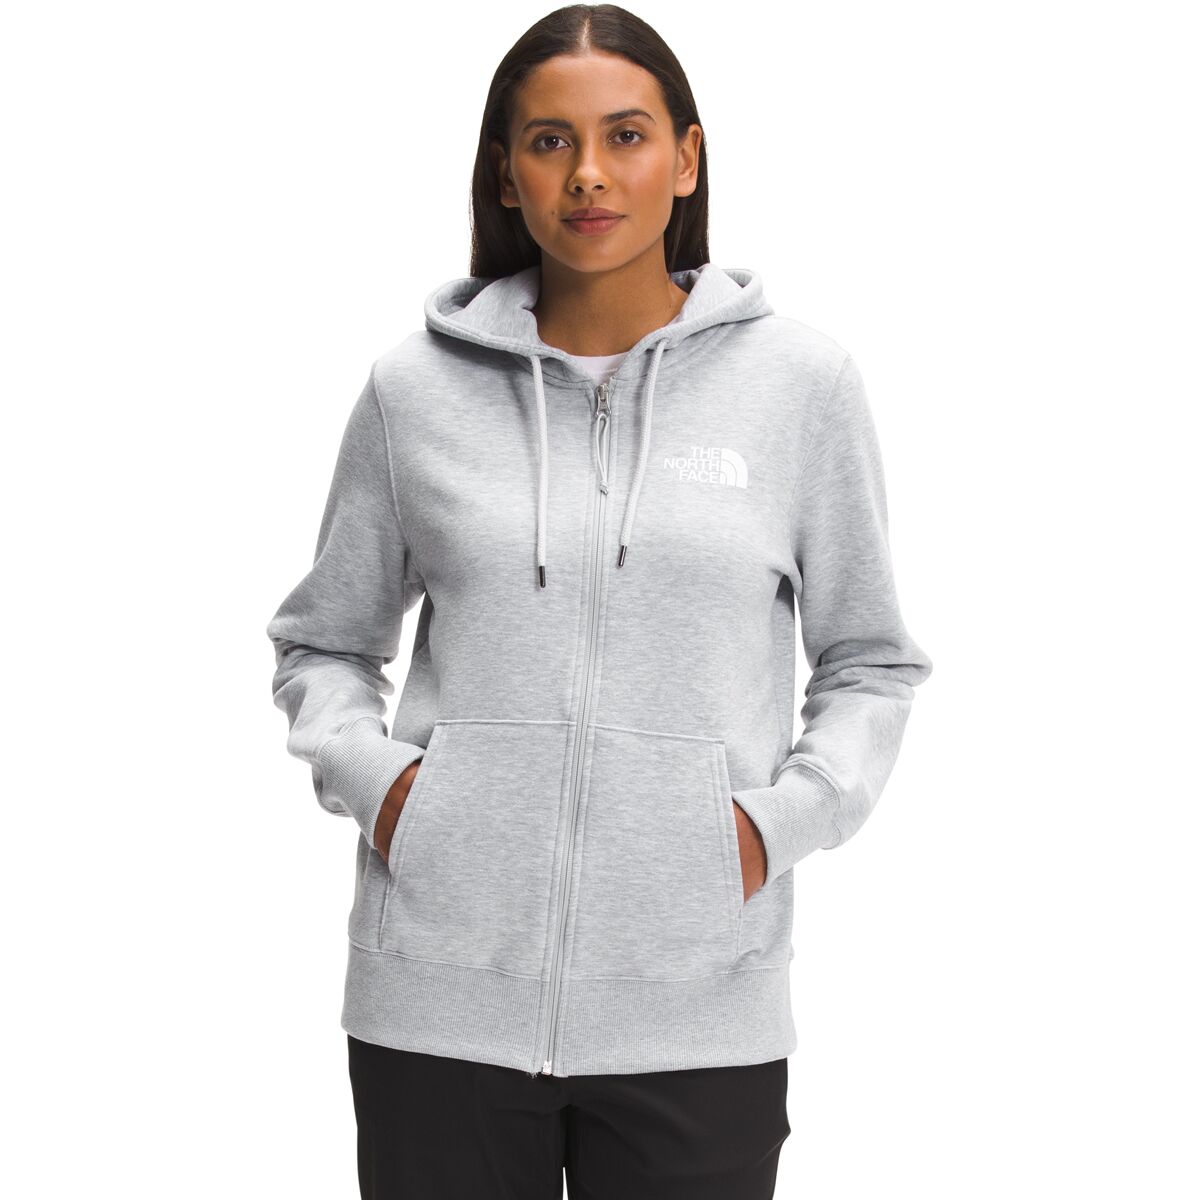 The North Face Half Dome Full-Zip Hoodie - Women's